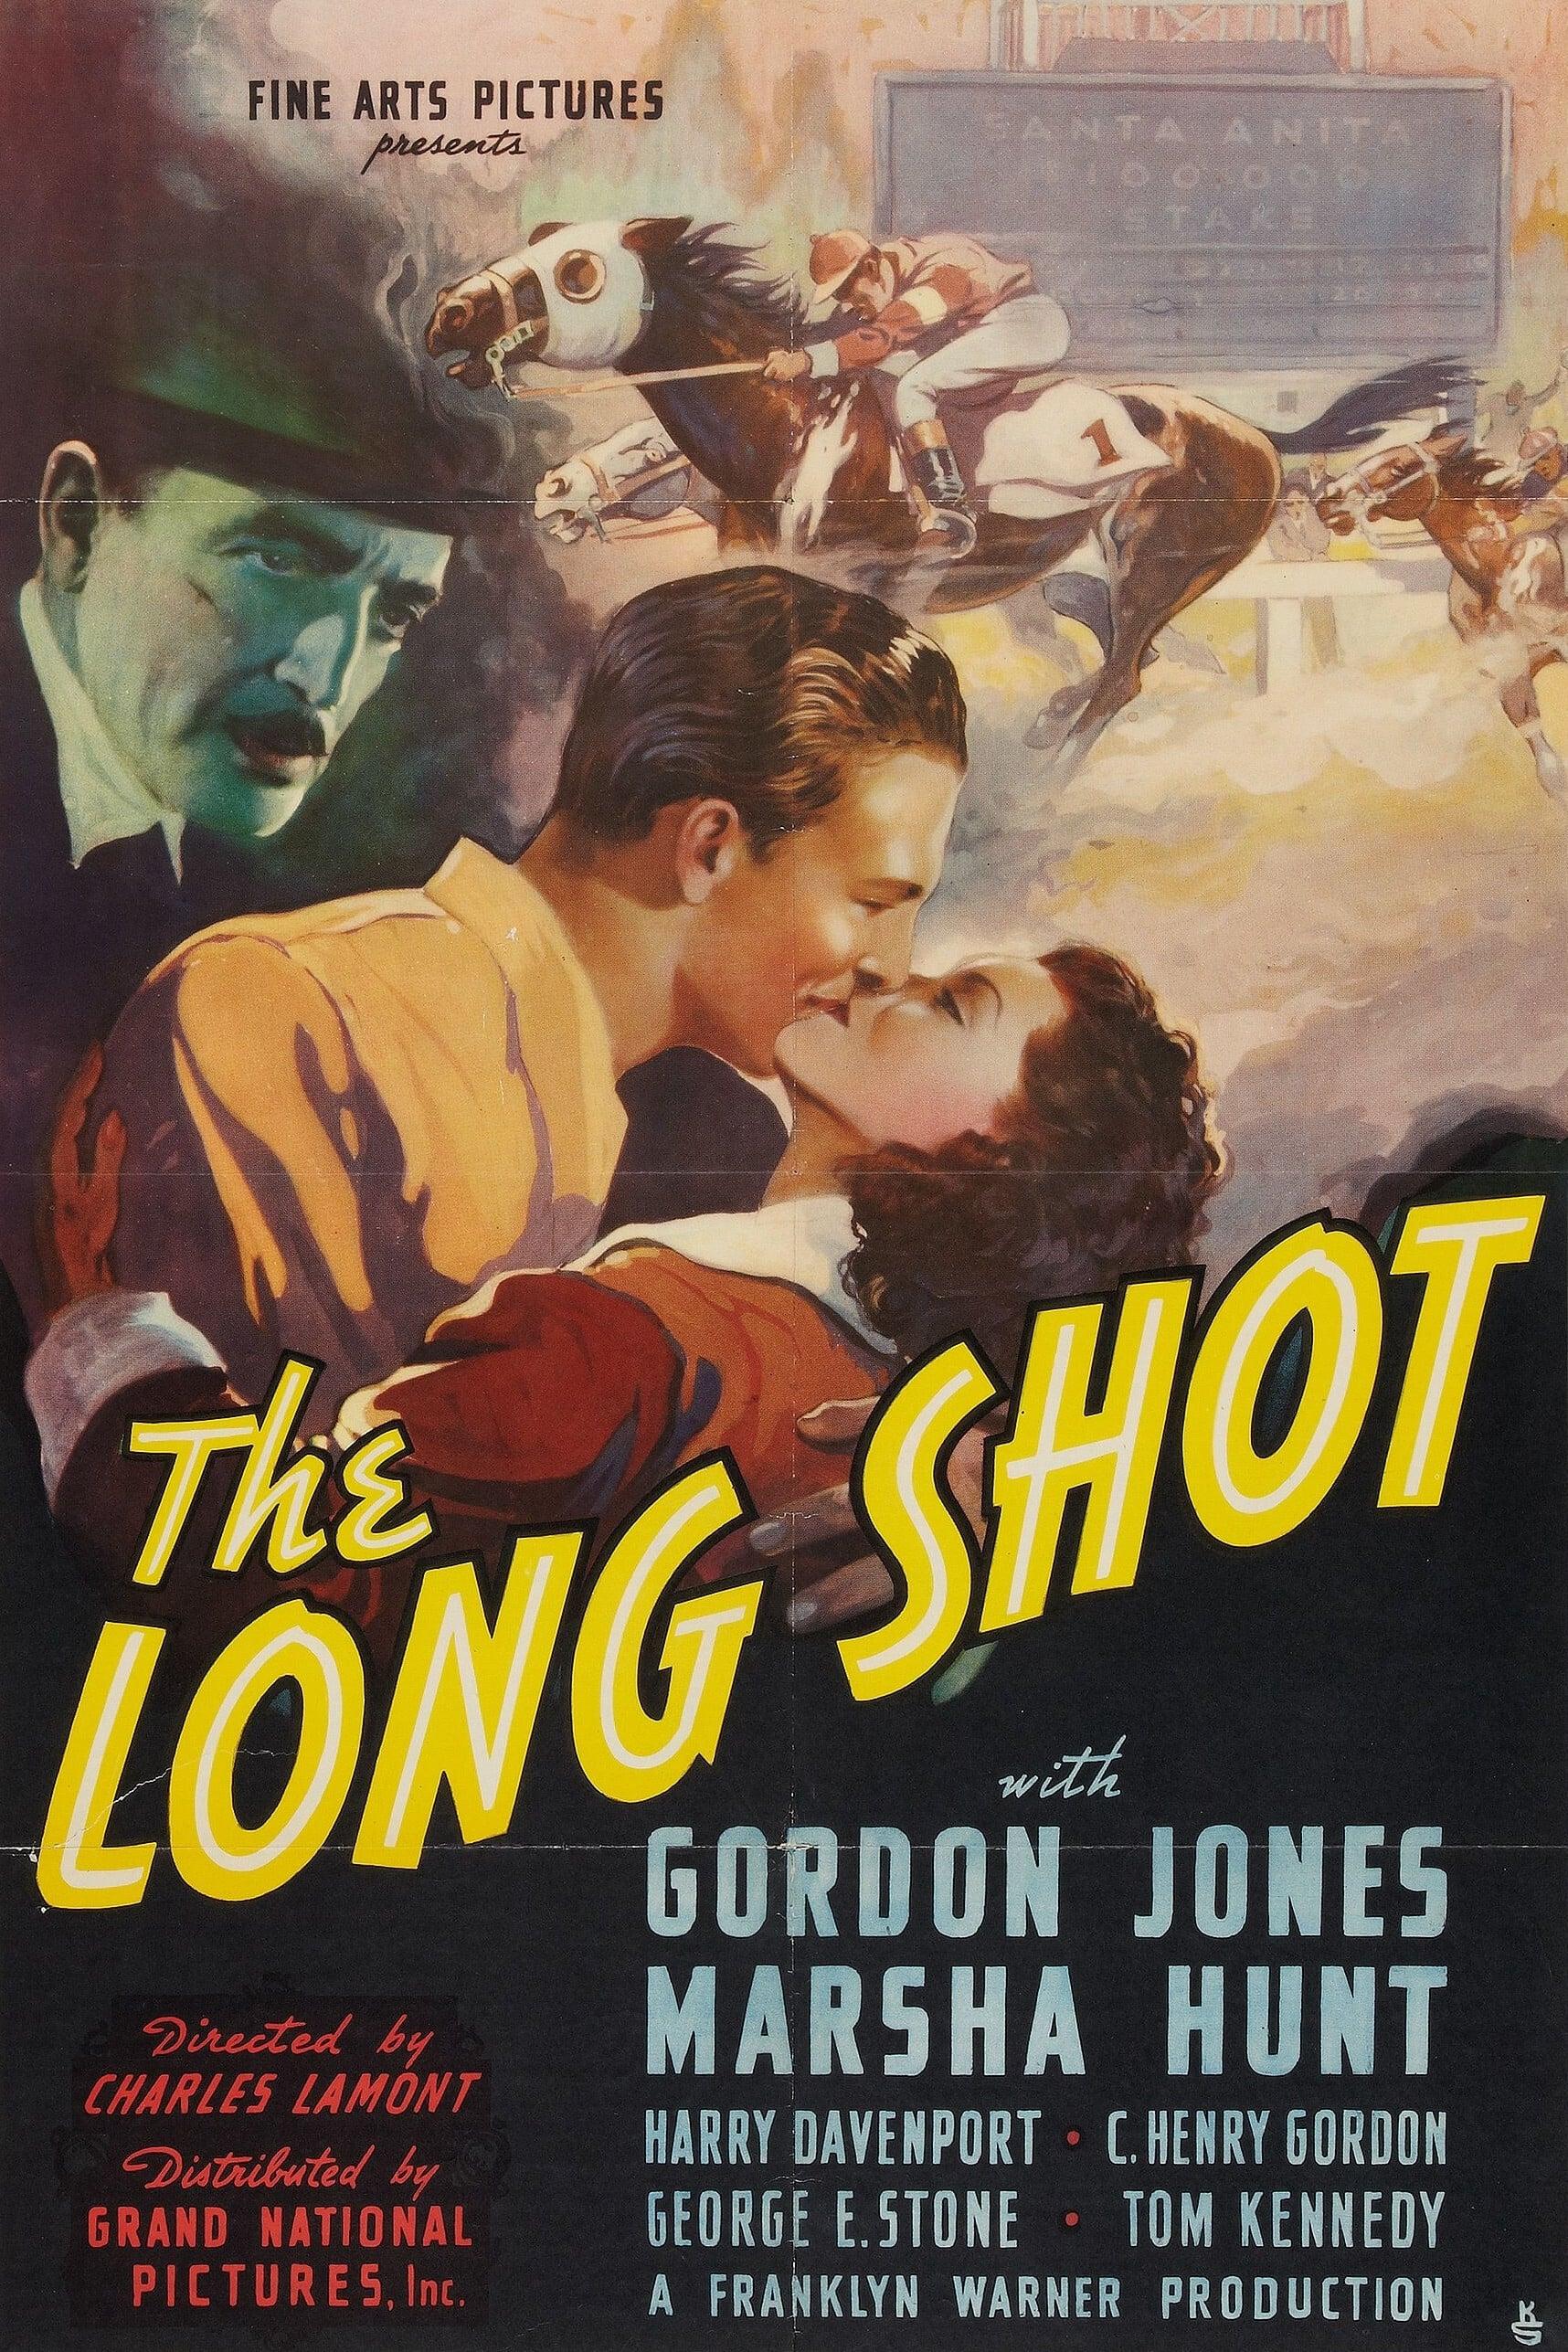 The Long Shot poster